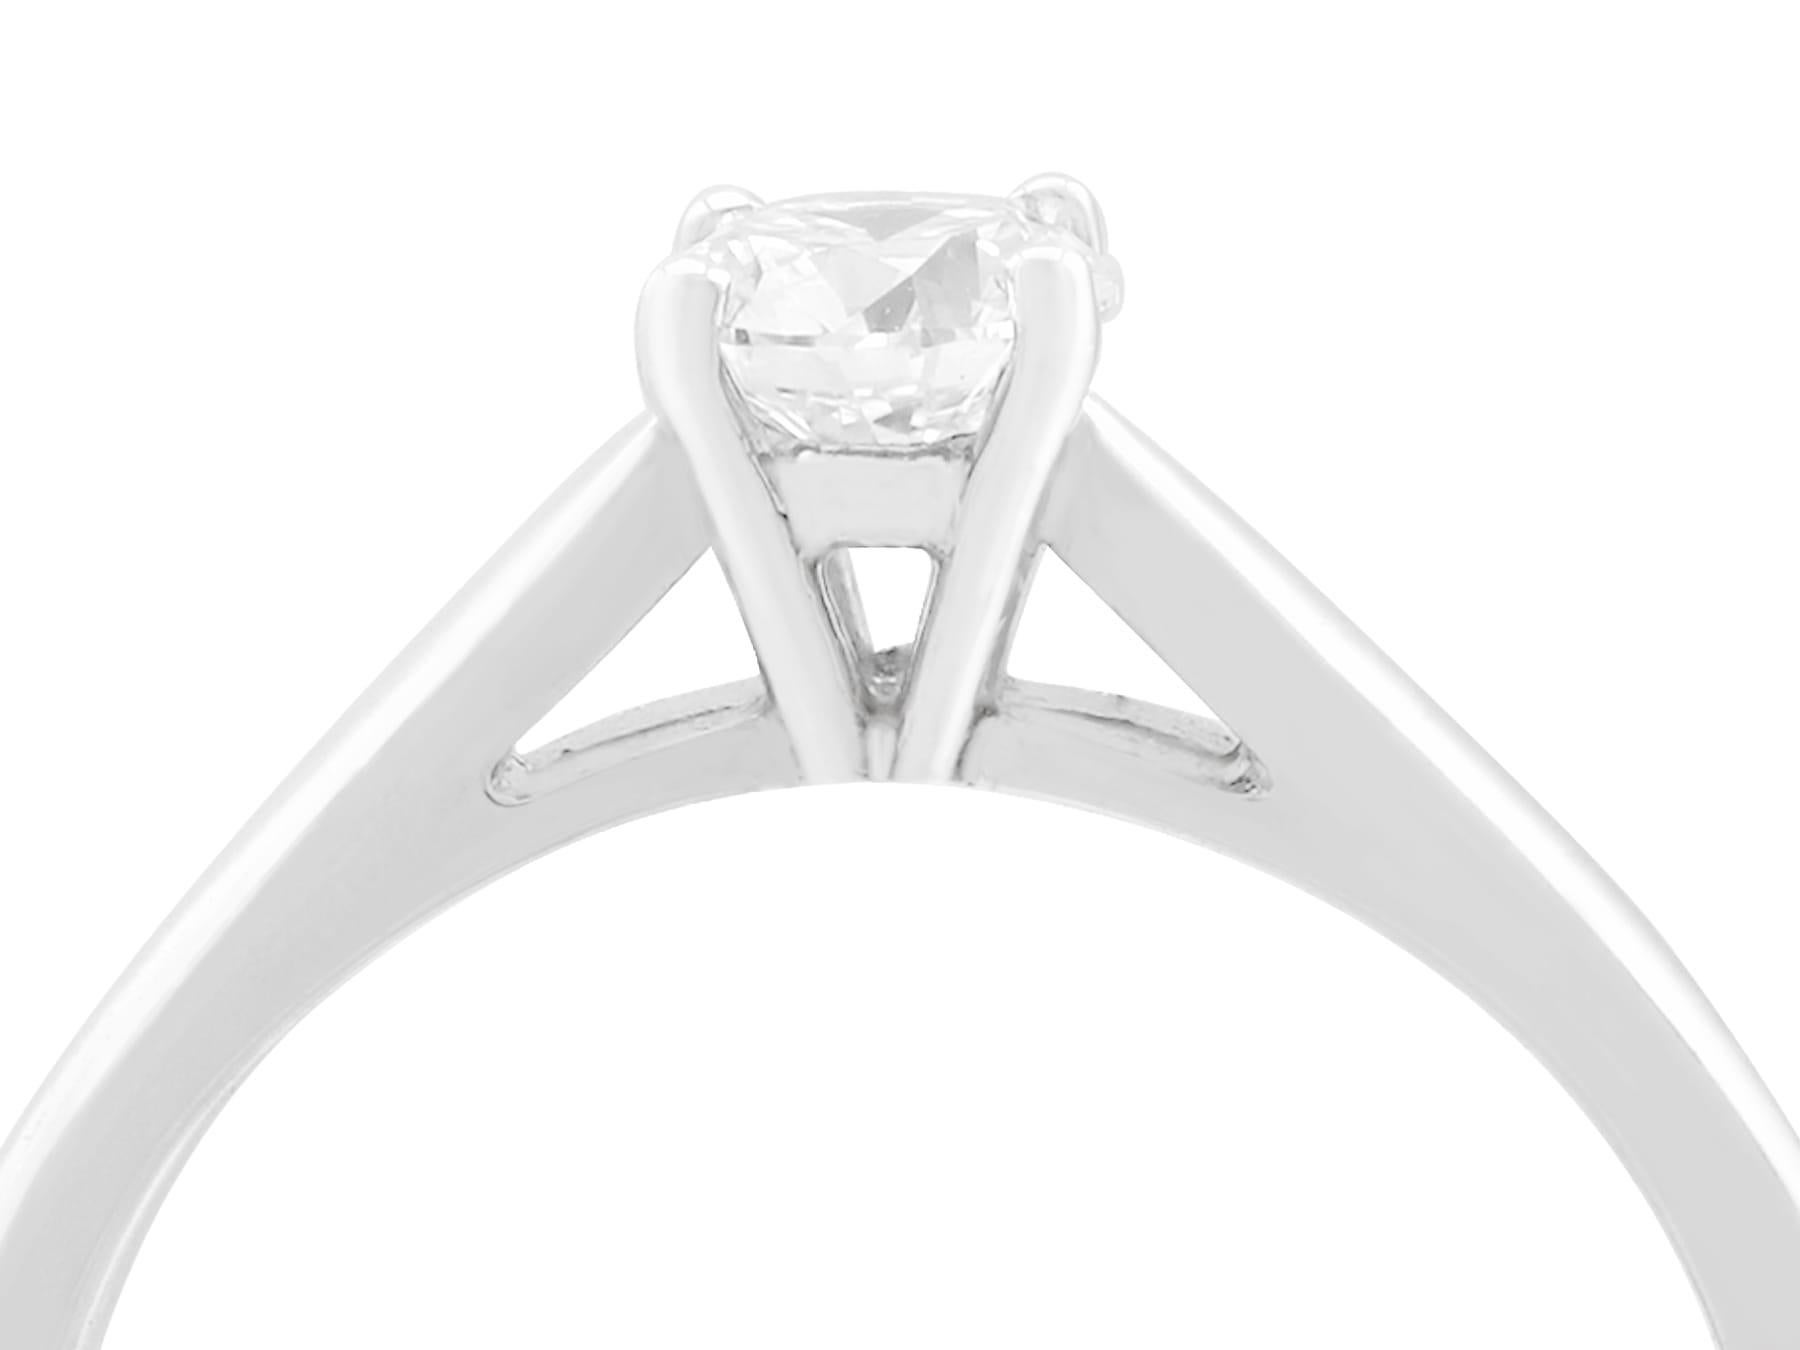 An impressive contemporary 0.40 carat diamond and platinum solitaire style engagement ring; part of our diverse diamond  jewelry collections.

This fine and impressive 0.40 carat diamond ring has been crafted in platinum.

The four claw setting